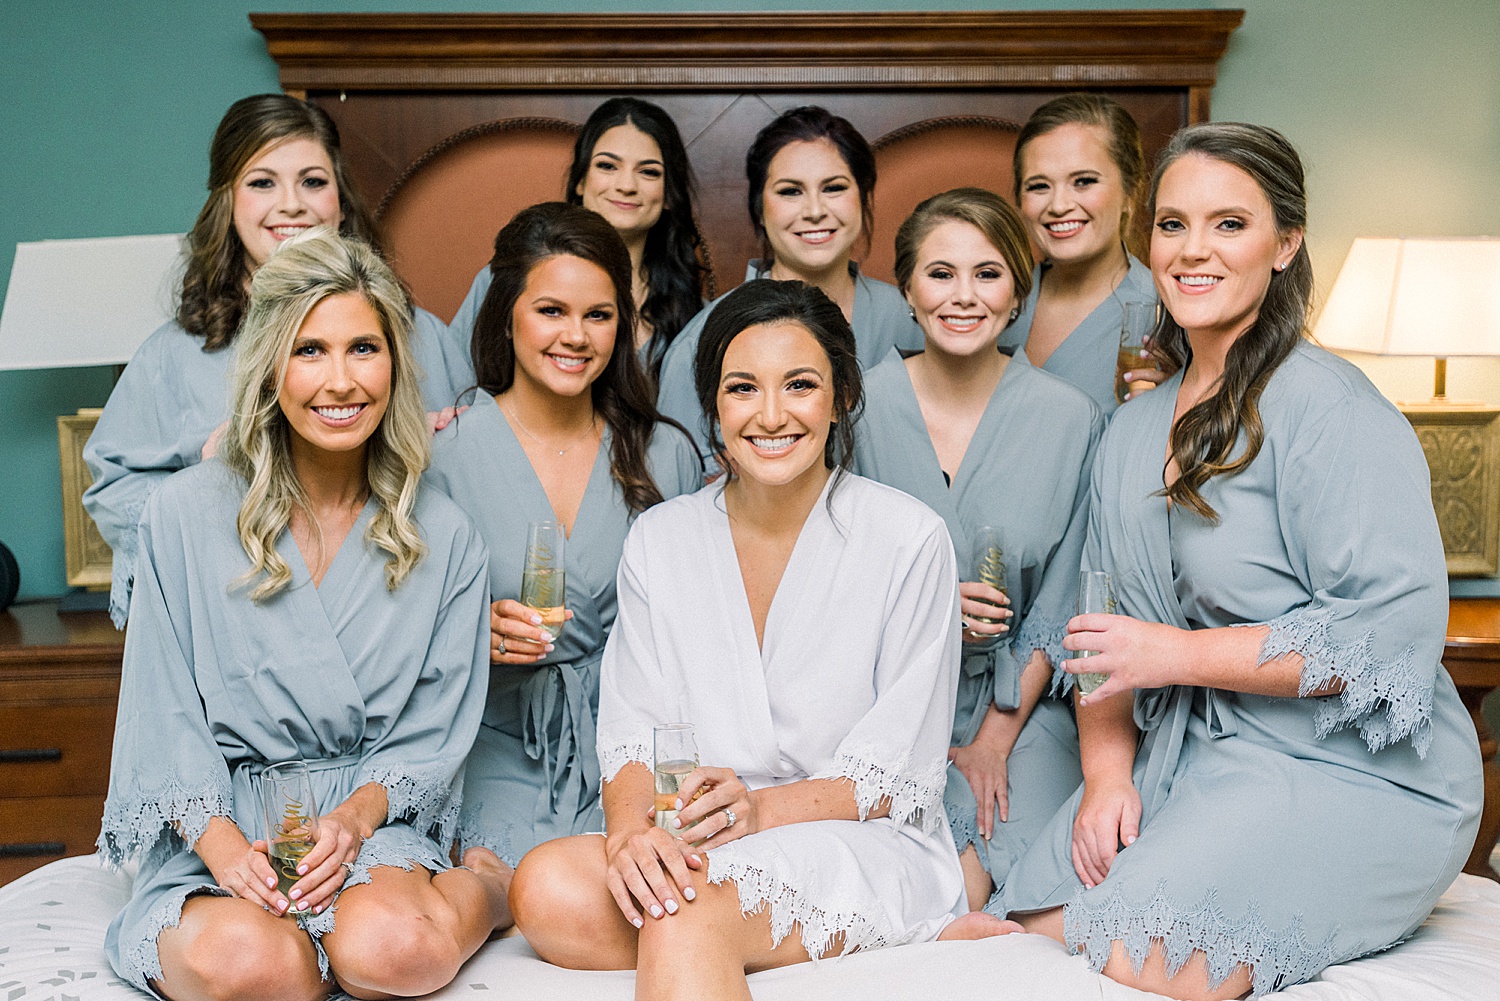 bride + bridesmaids in matching robes getting ready for wedding